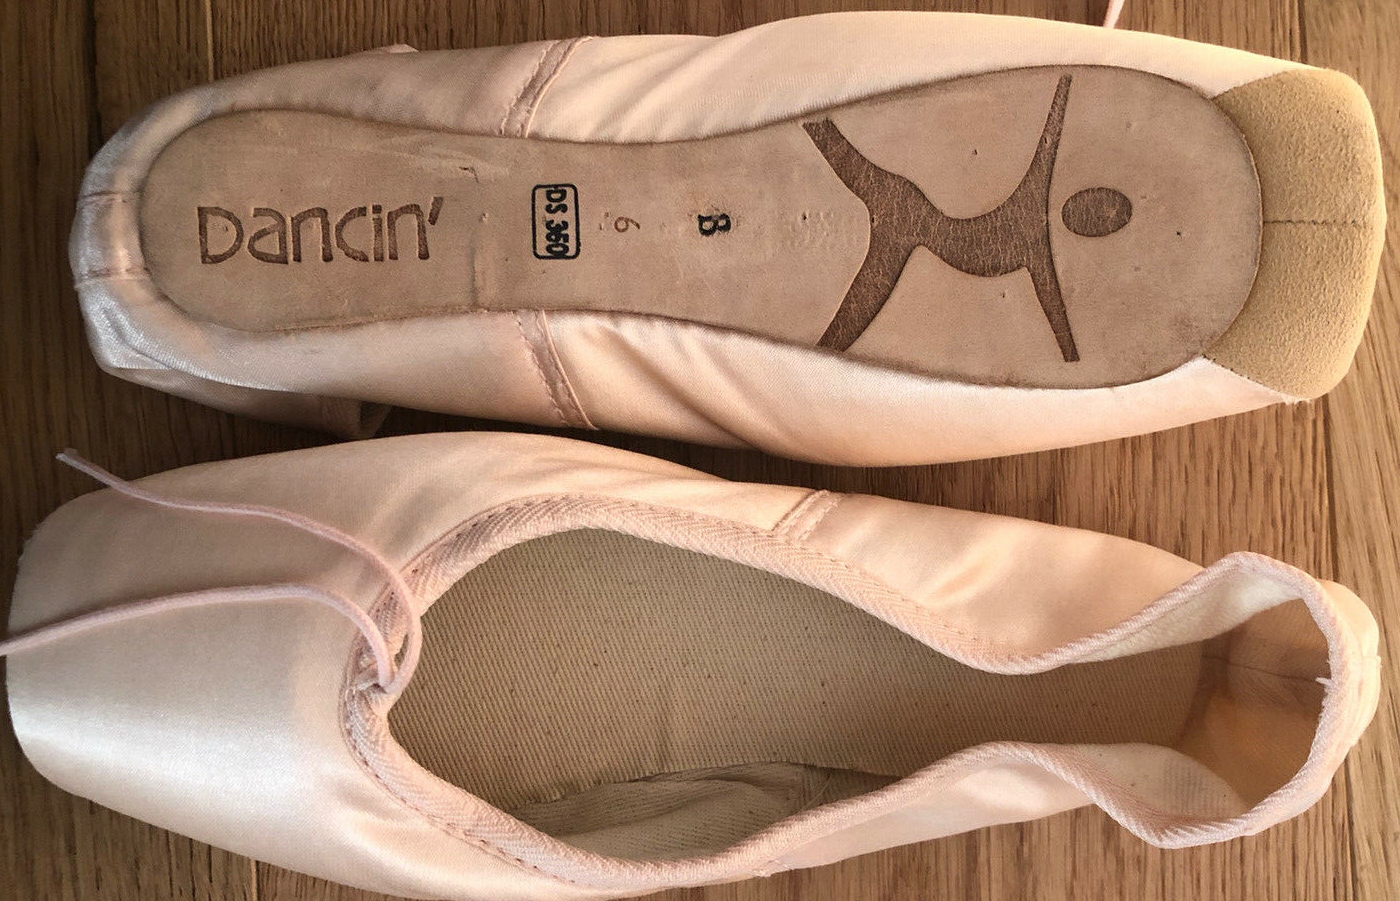 Ballet Shoes for sale in Londrina, Facebook Marketplace